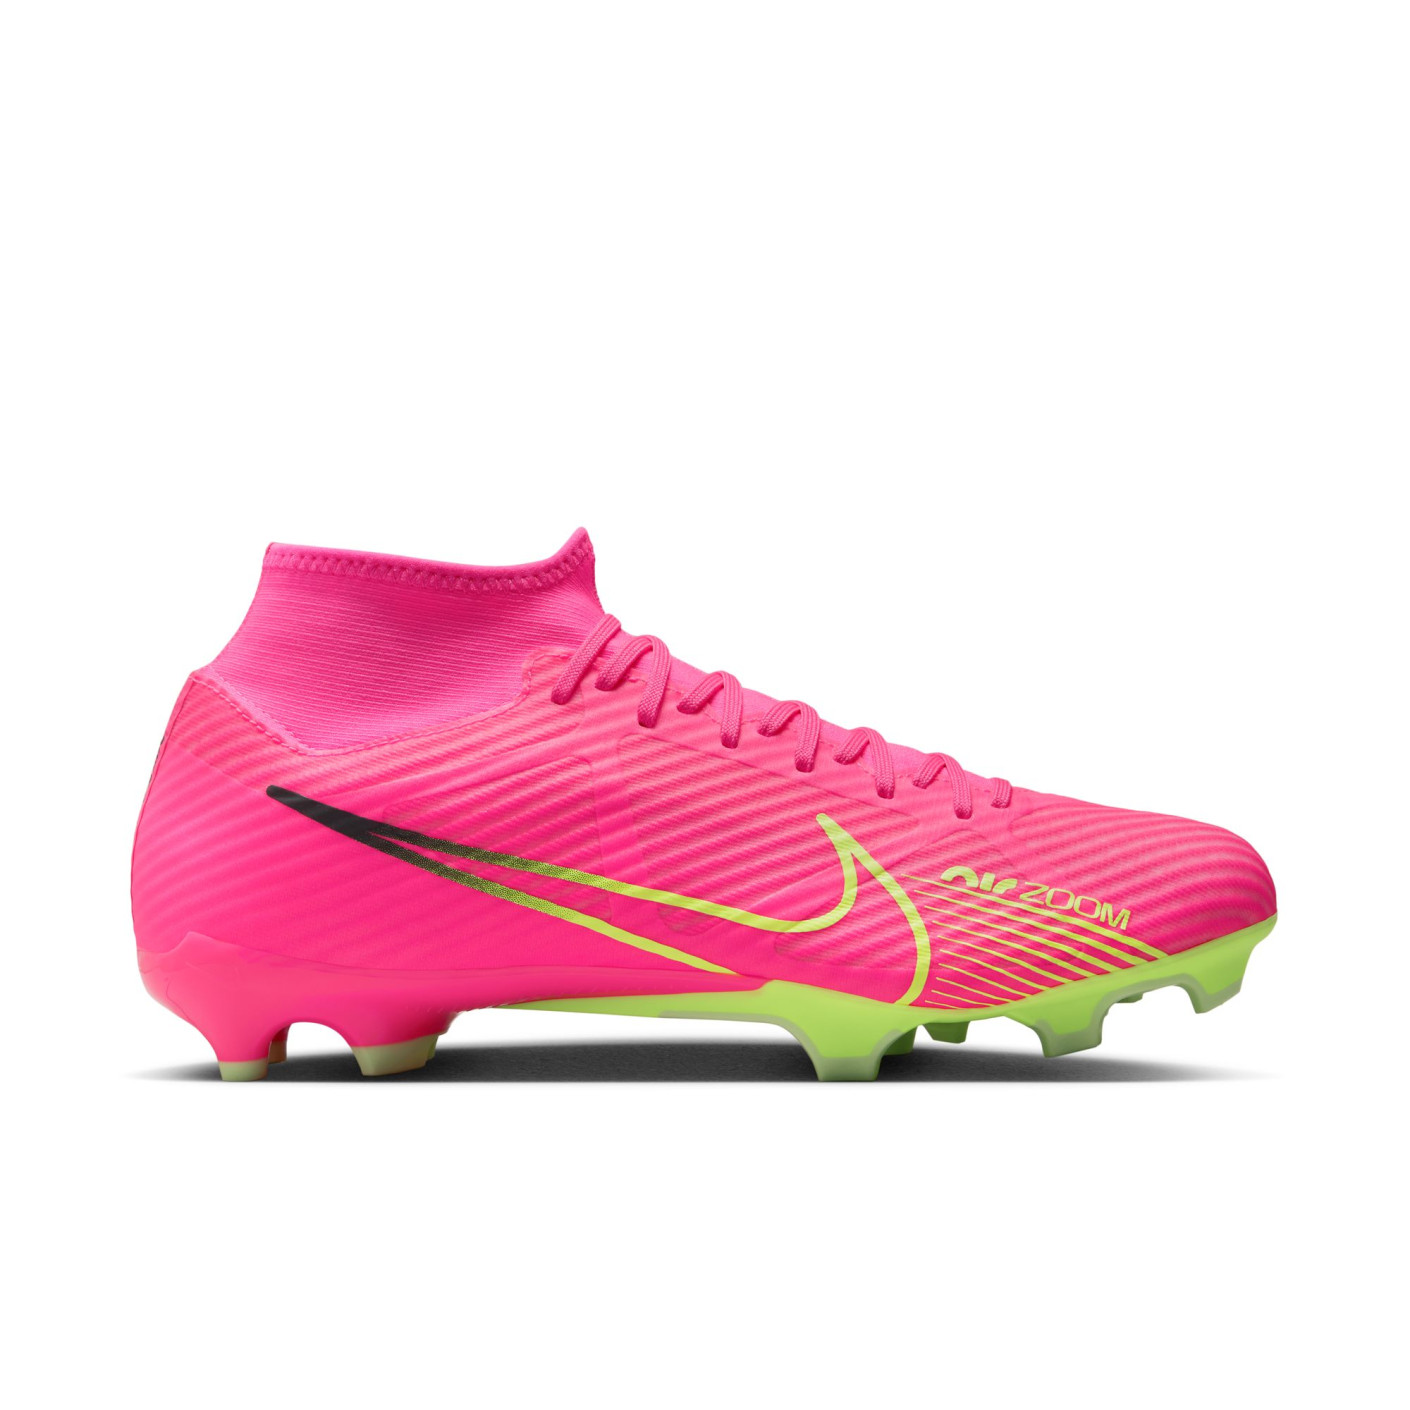 Nike Zoom Mercurial Superfly 9 Academy Grass/ Artificial Grass Football Shoes (MG) Pink Yellow Black